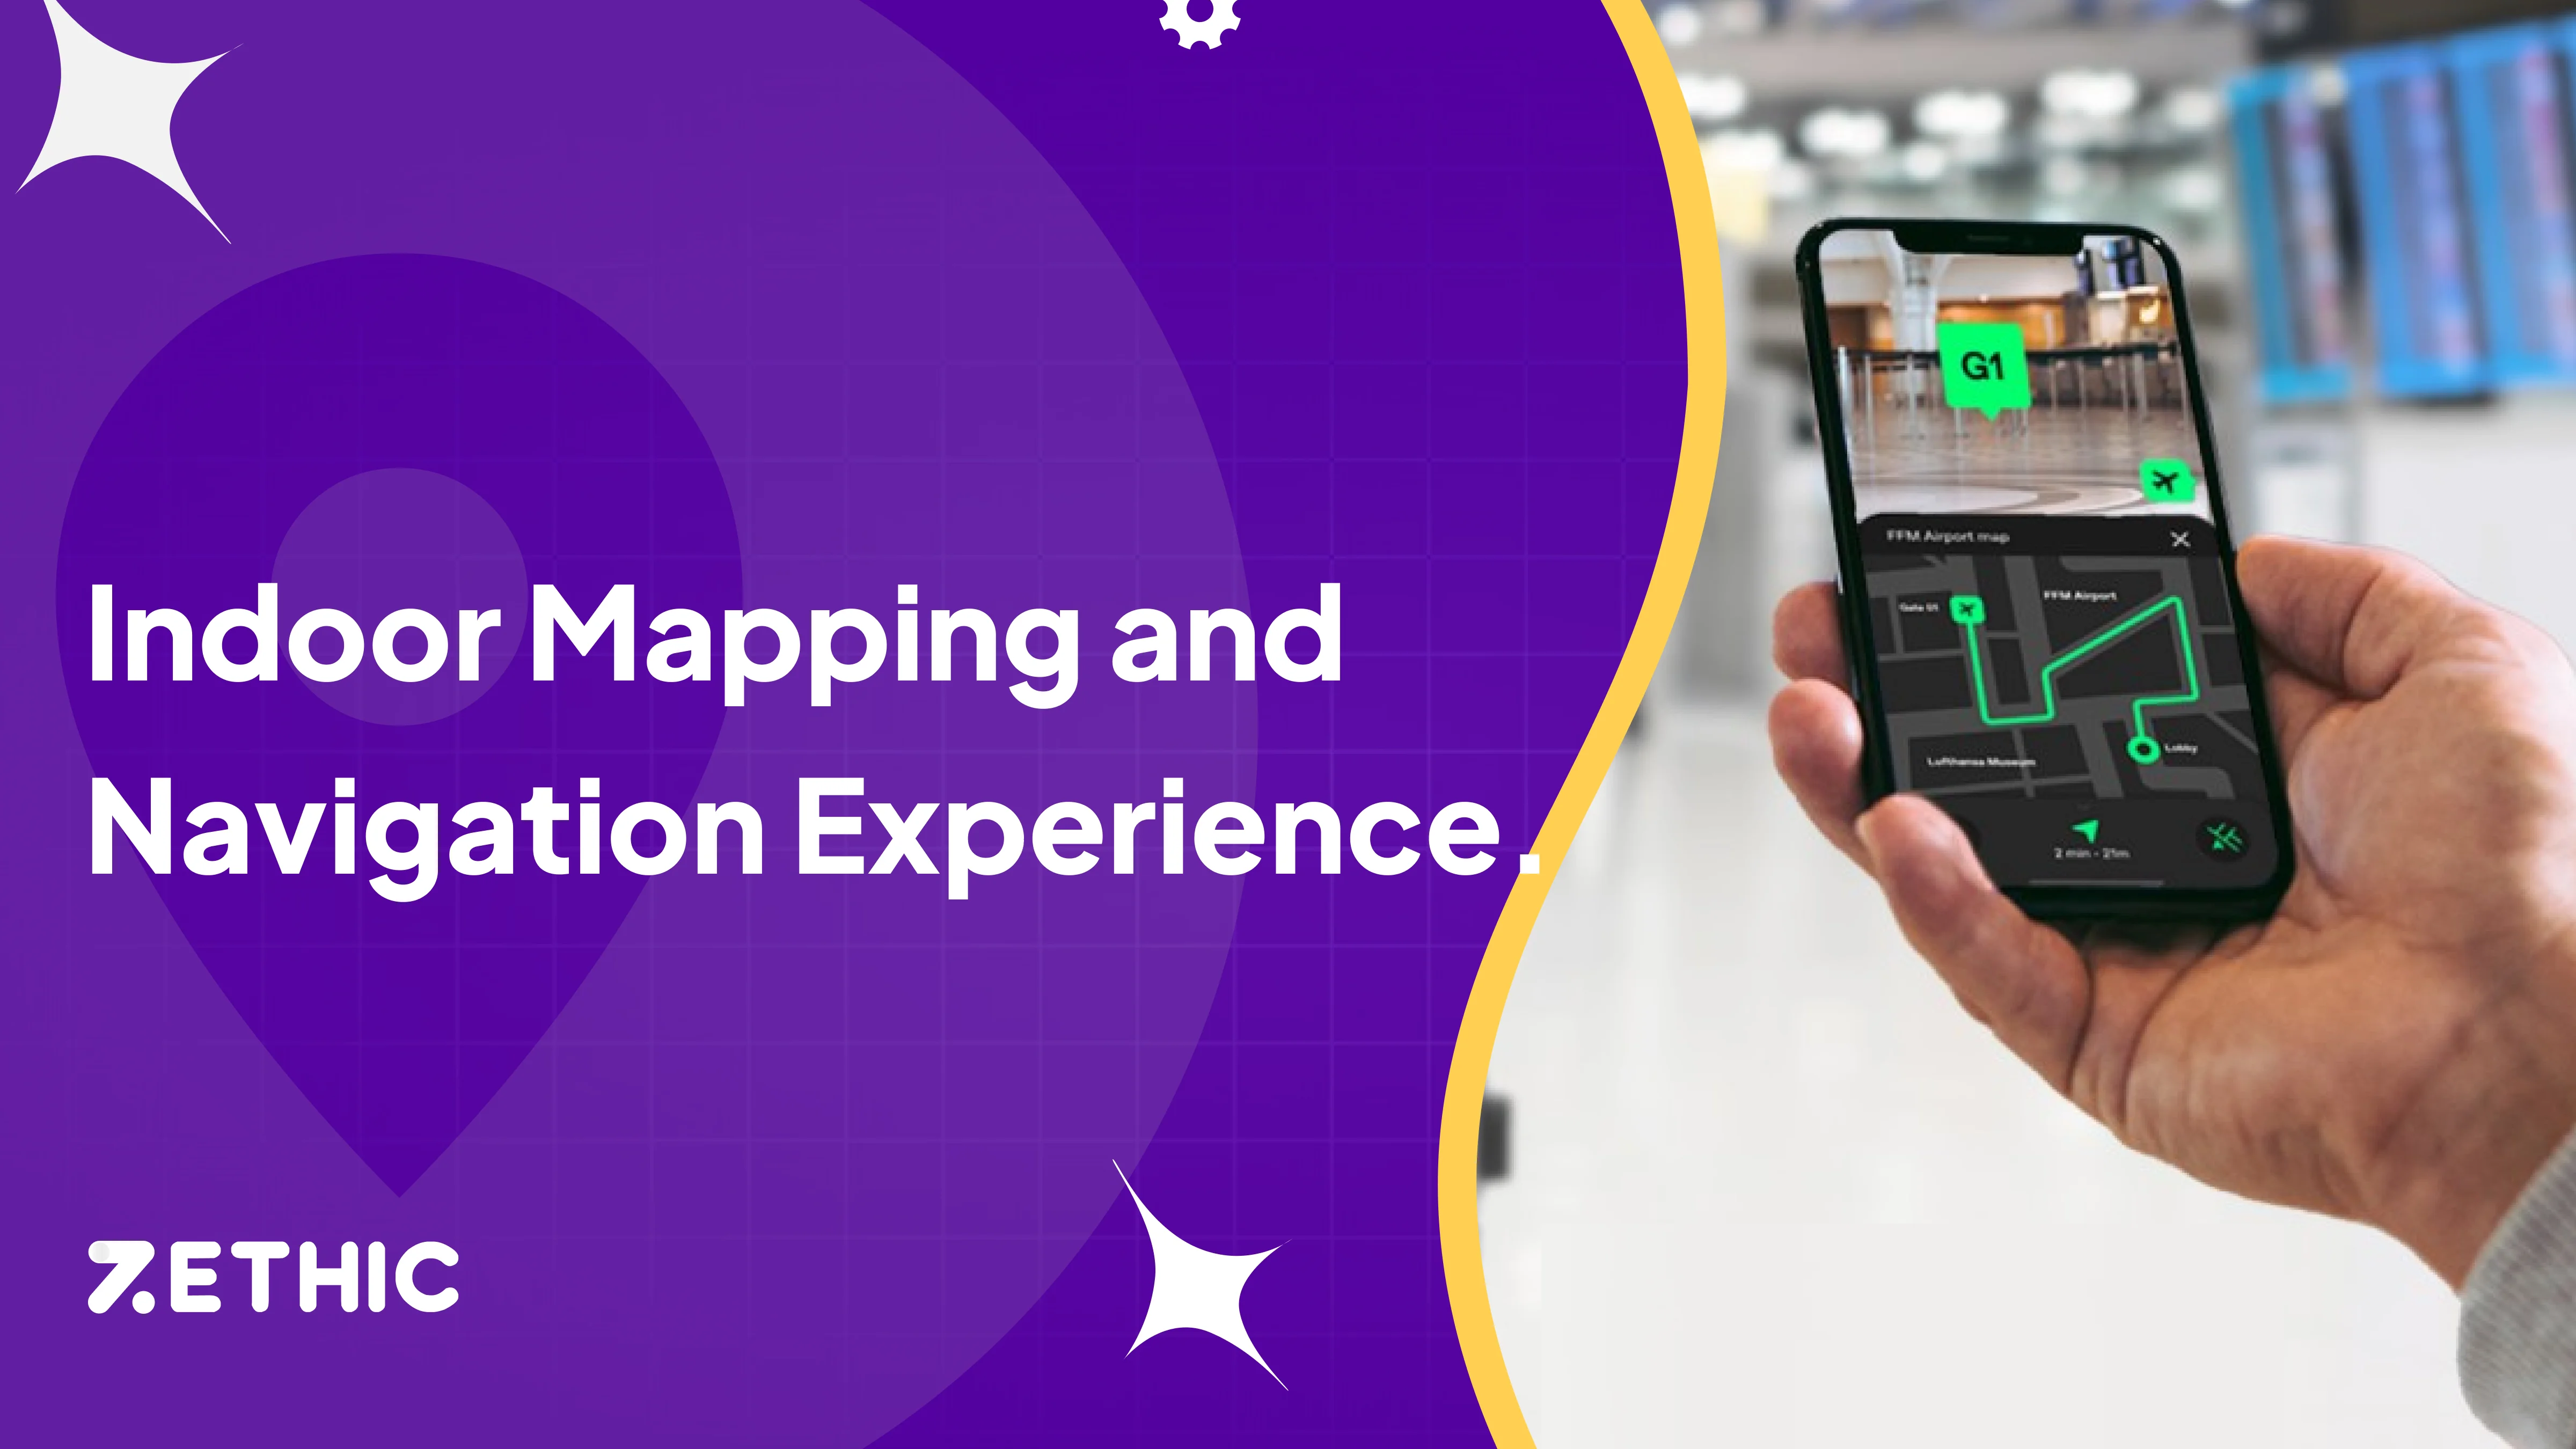 How to Create Indoor Navigation Mapping and Positioning For Malls, Airports, Schools And Offices